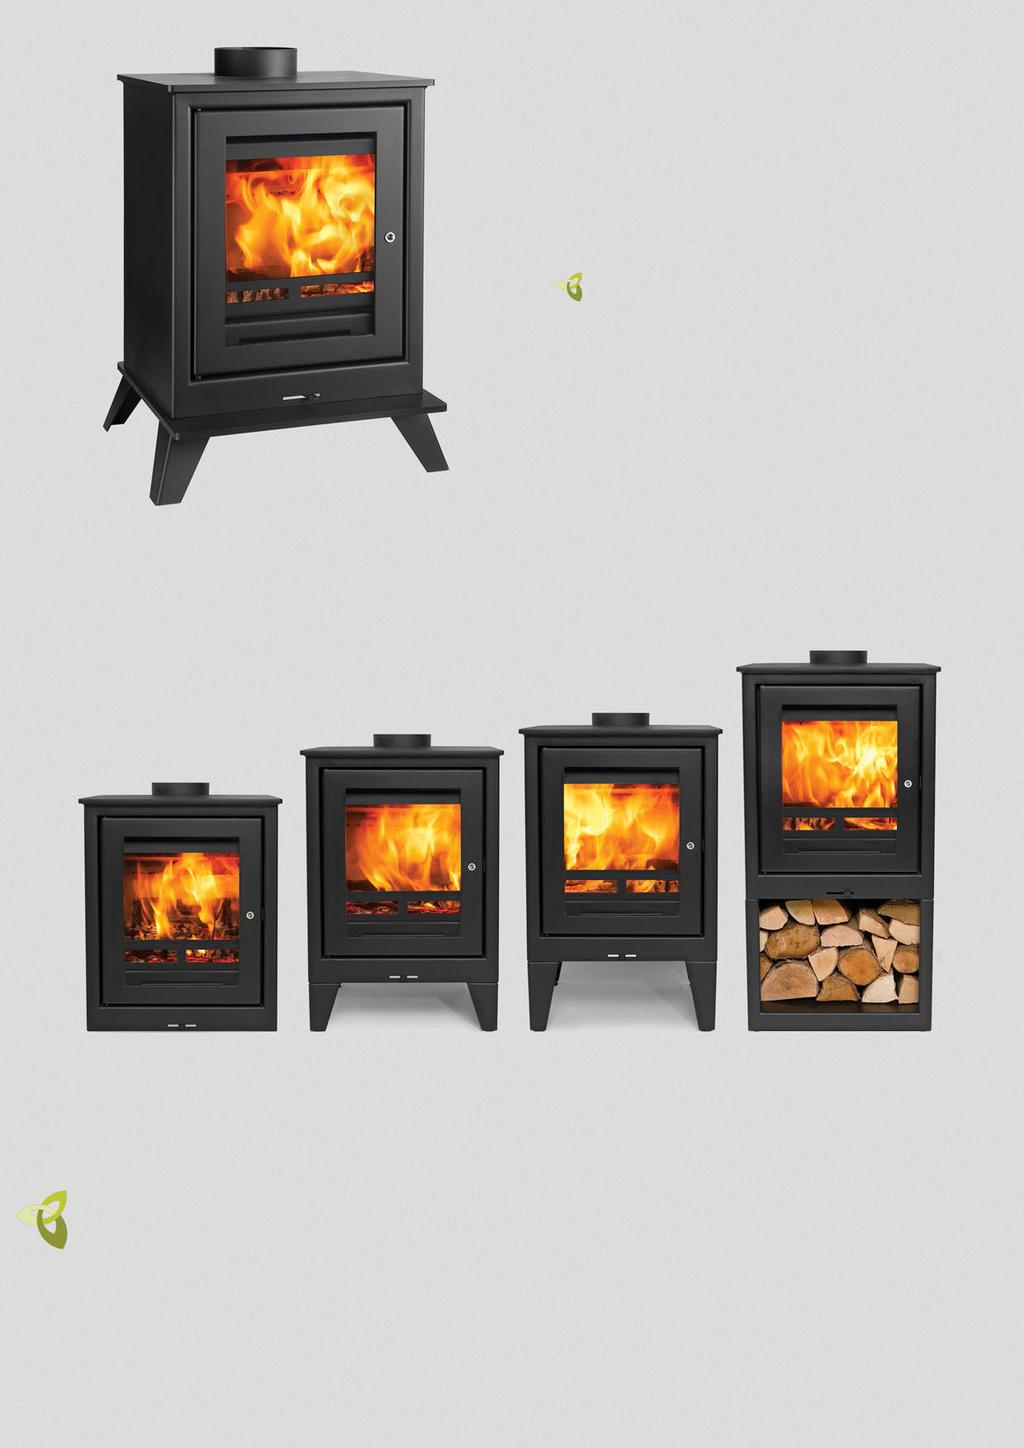 18f HIGH EFFIIENY 4.9 kw output 84% efficient Wood & multi-fuel Defra approved No air supply required* harcoal or almond colour fish slimle, high-efficiency wood burner and multi-fuel stove.